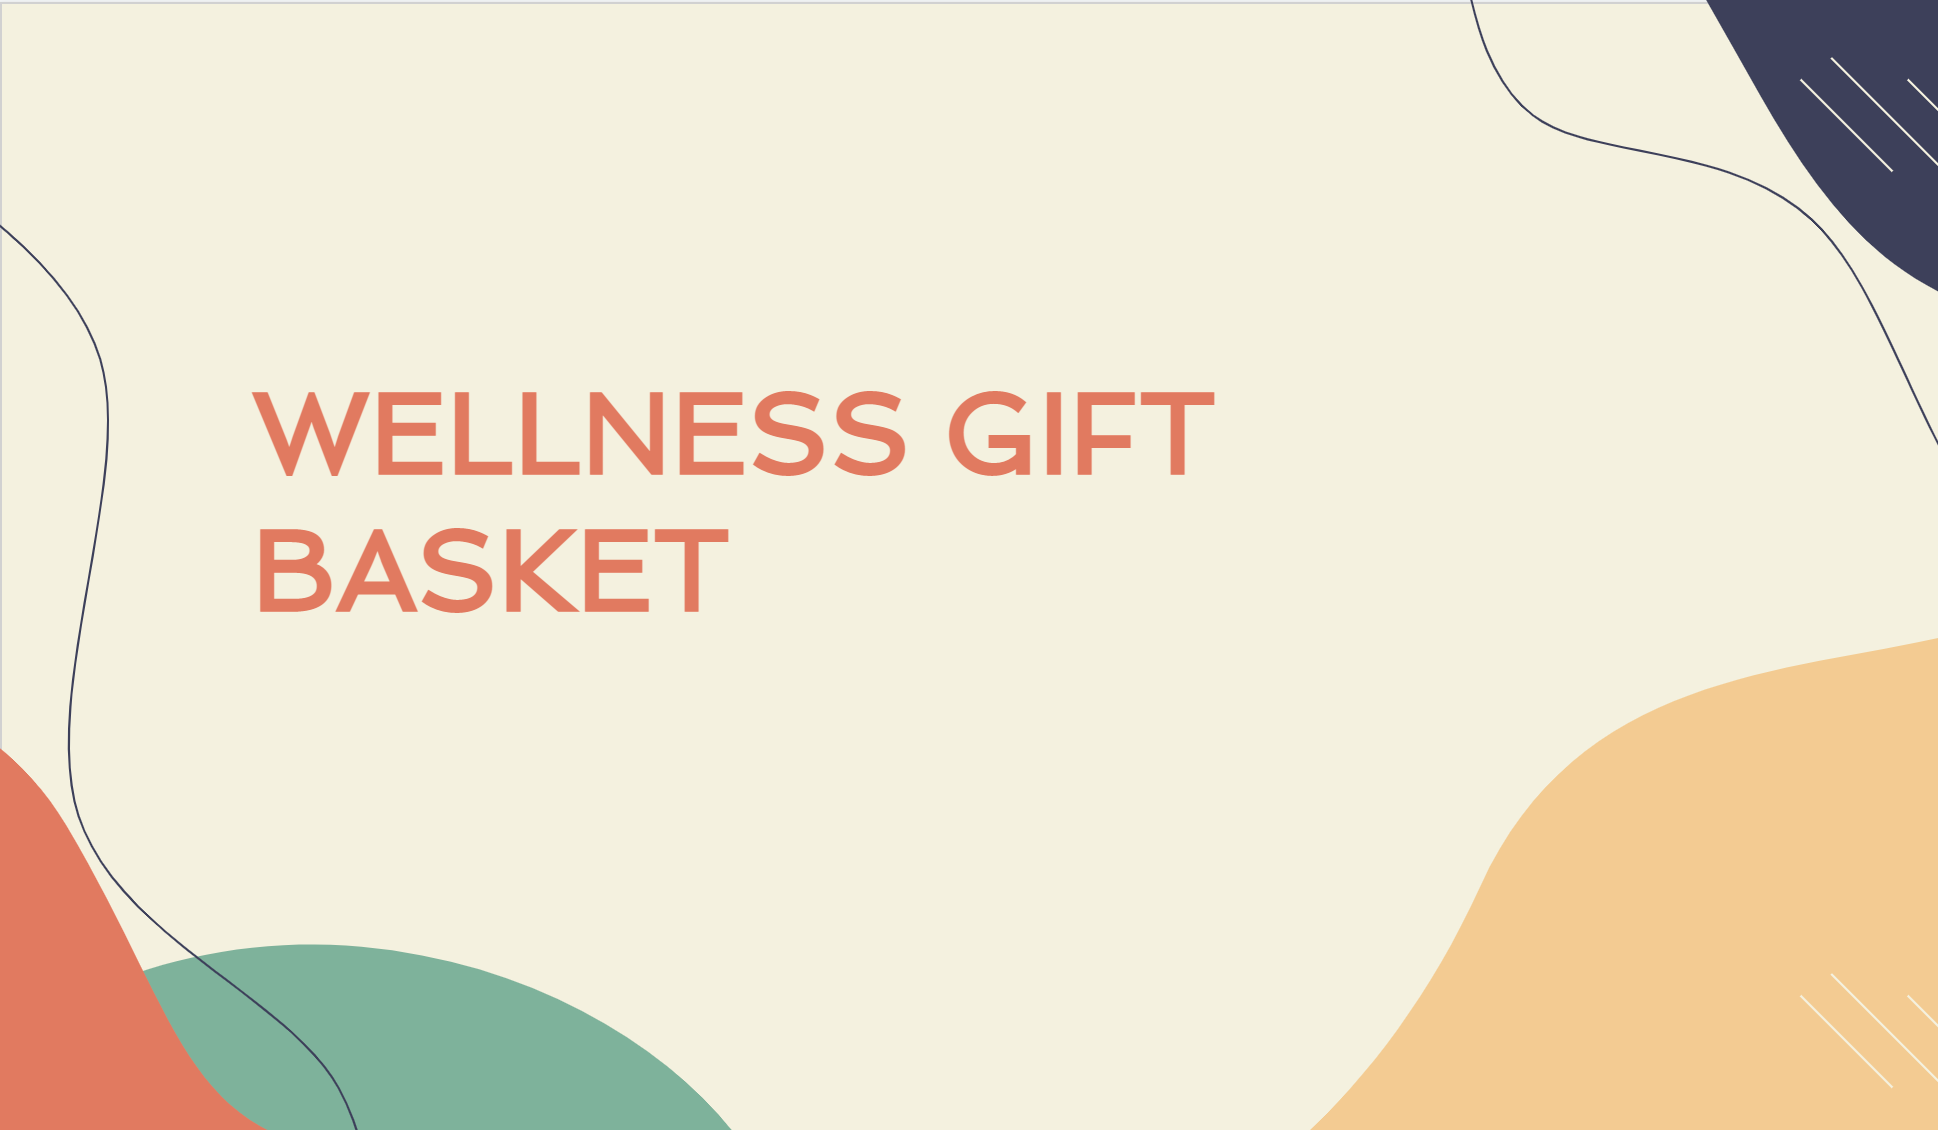 the words "wellness gift basket" on a plain background